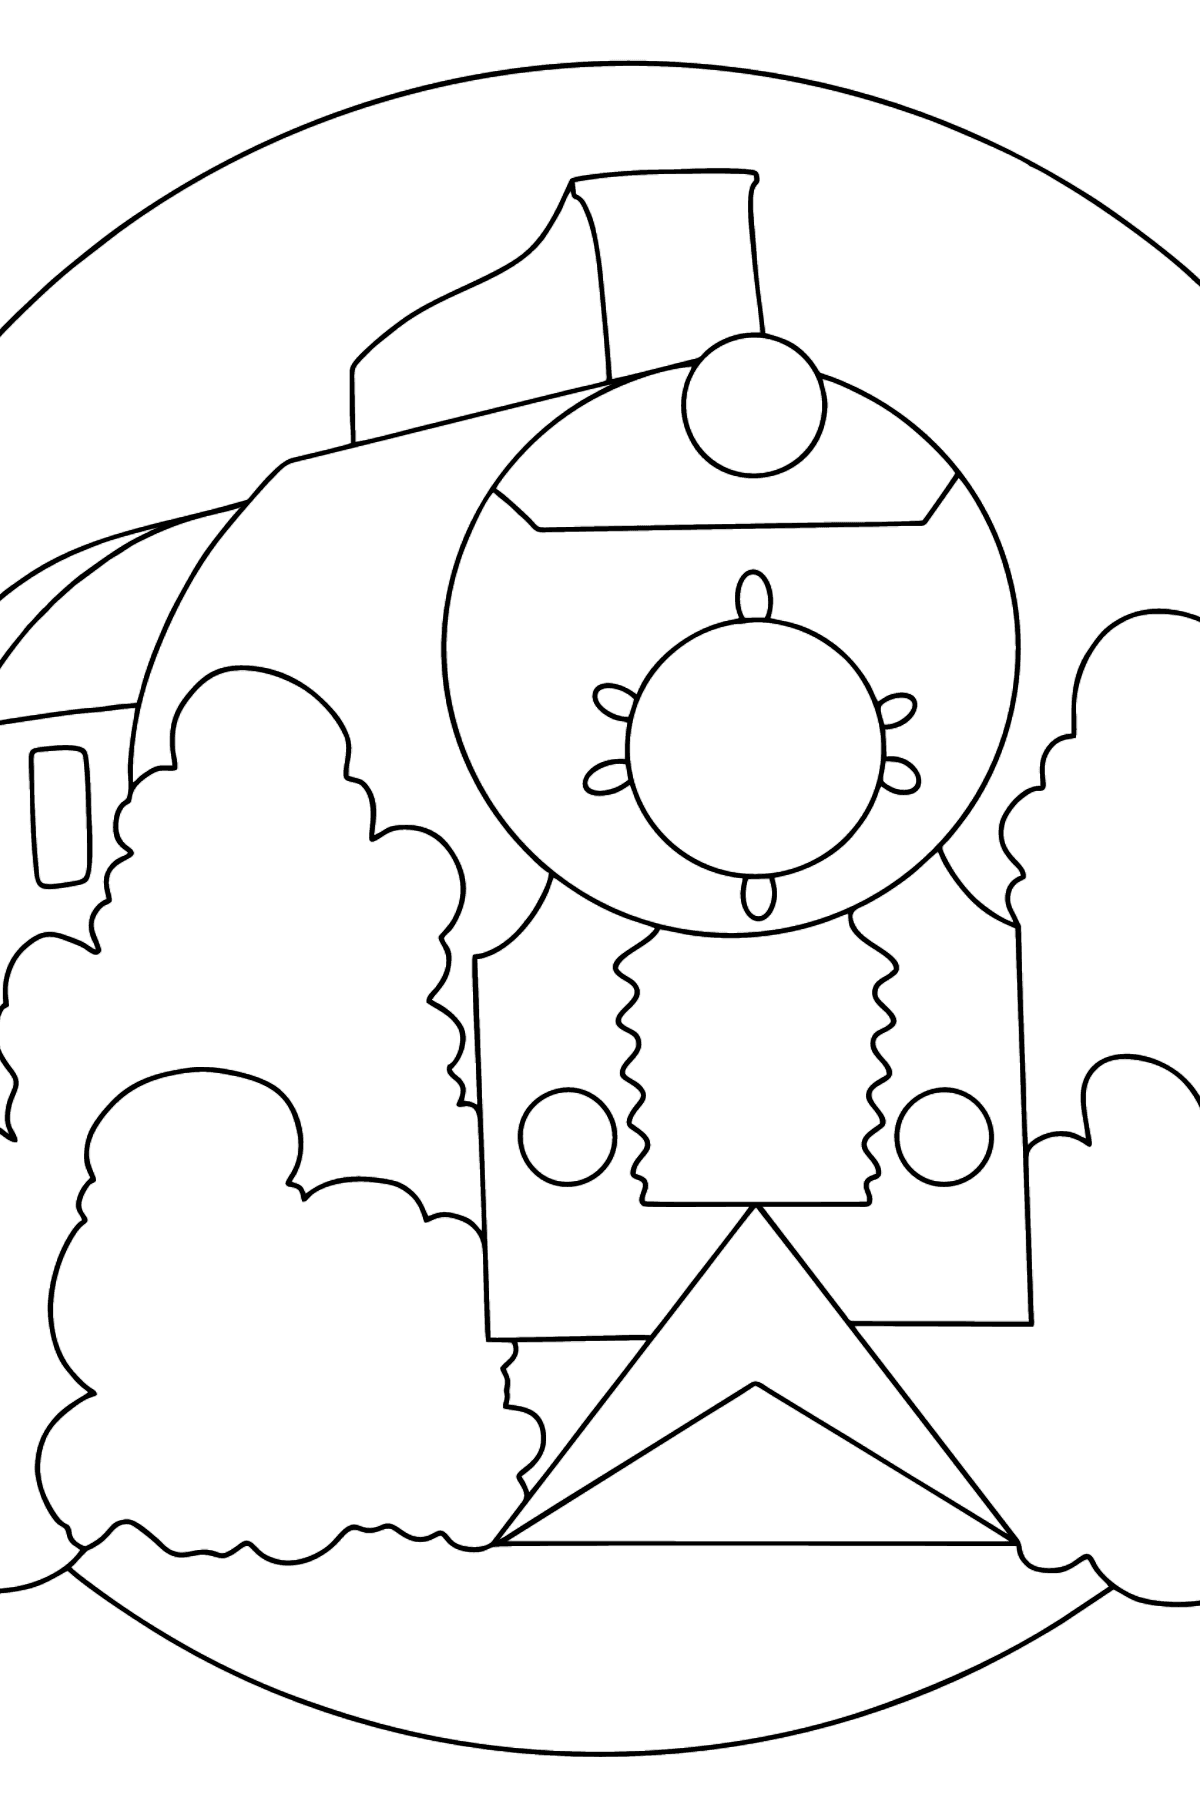 Coloring Page - A Locomotive with Coaches - Coloring Pages for Kids